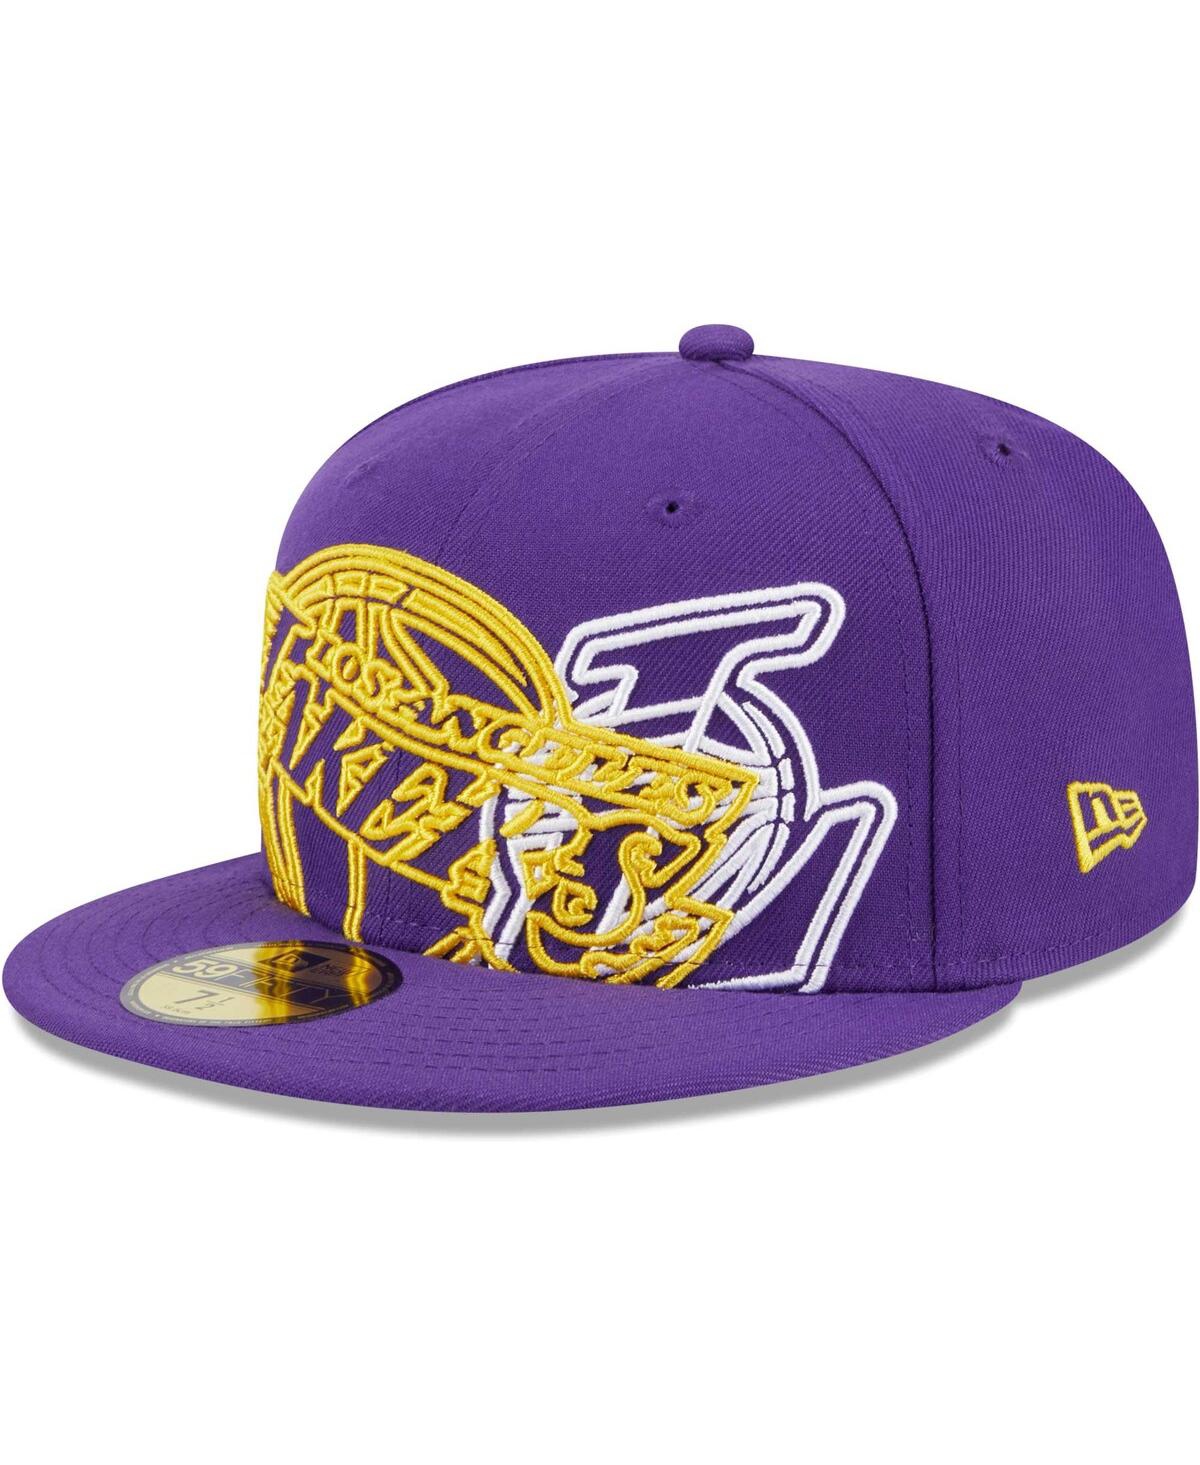 Shop New Era Men's  Purple Los Angeles Lakers Game Day Hollow Logo Mashup 59fifty Fitted Hat